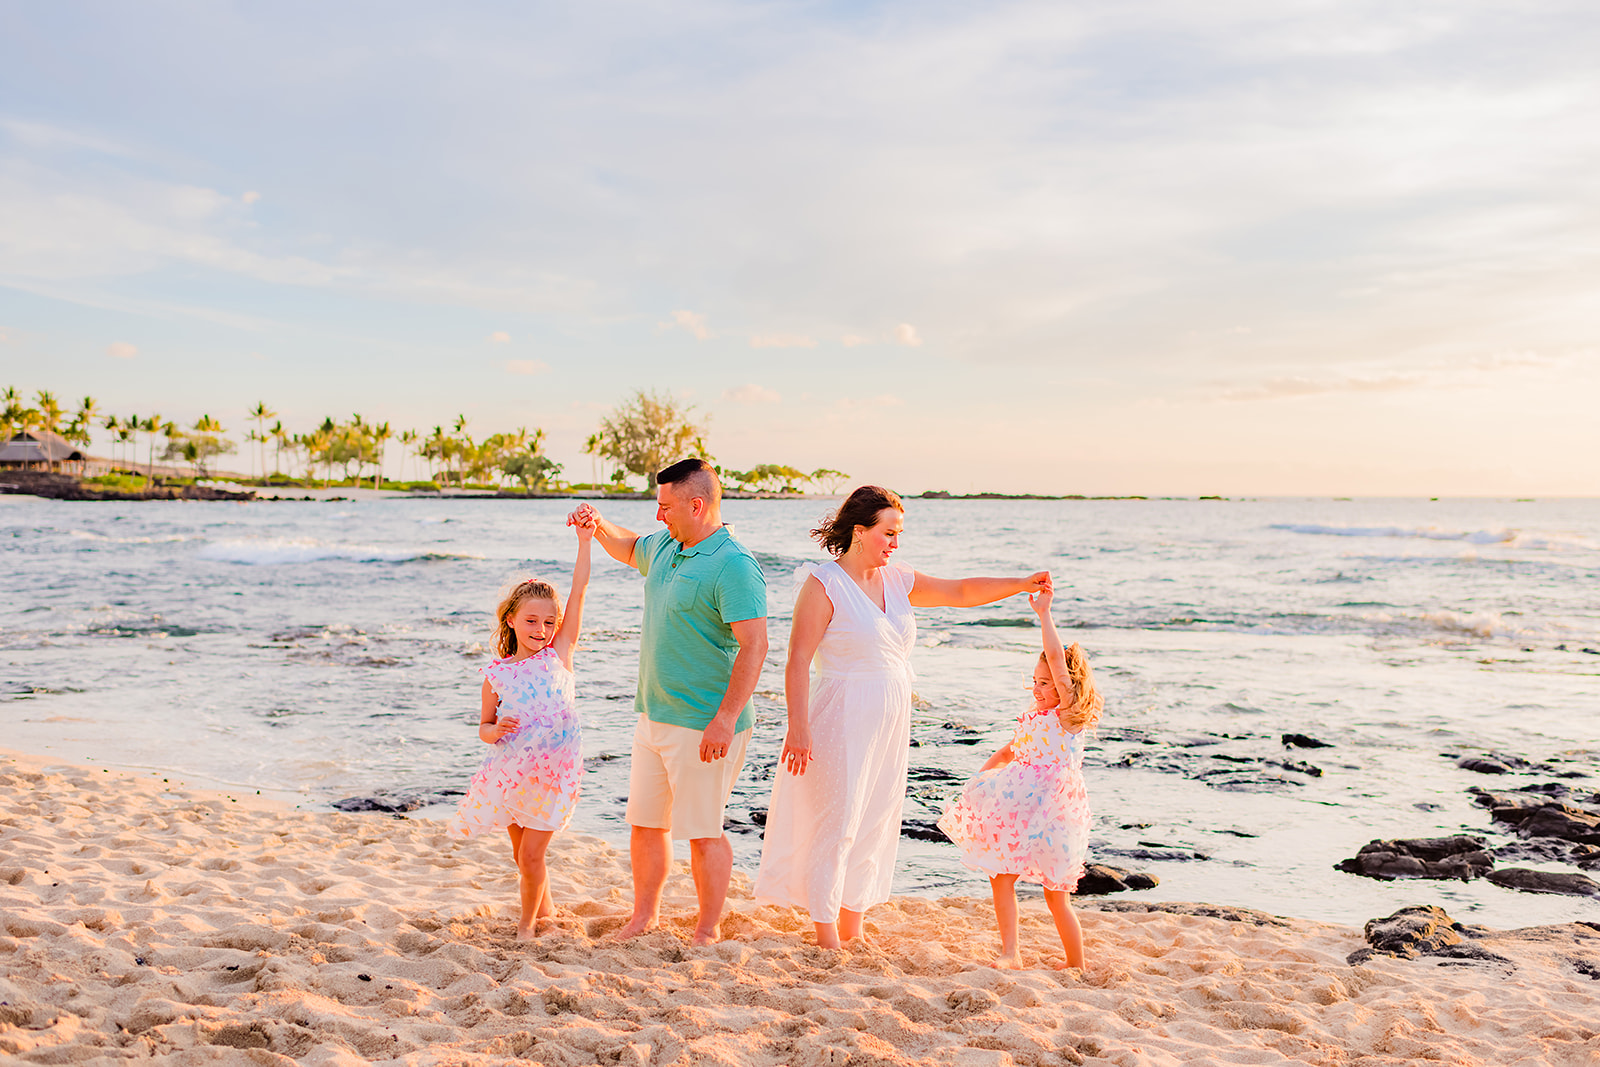 A mother and father play with their two young daughters while taking professional family beach photos on Hawaii.